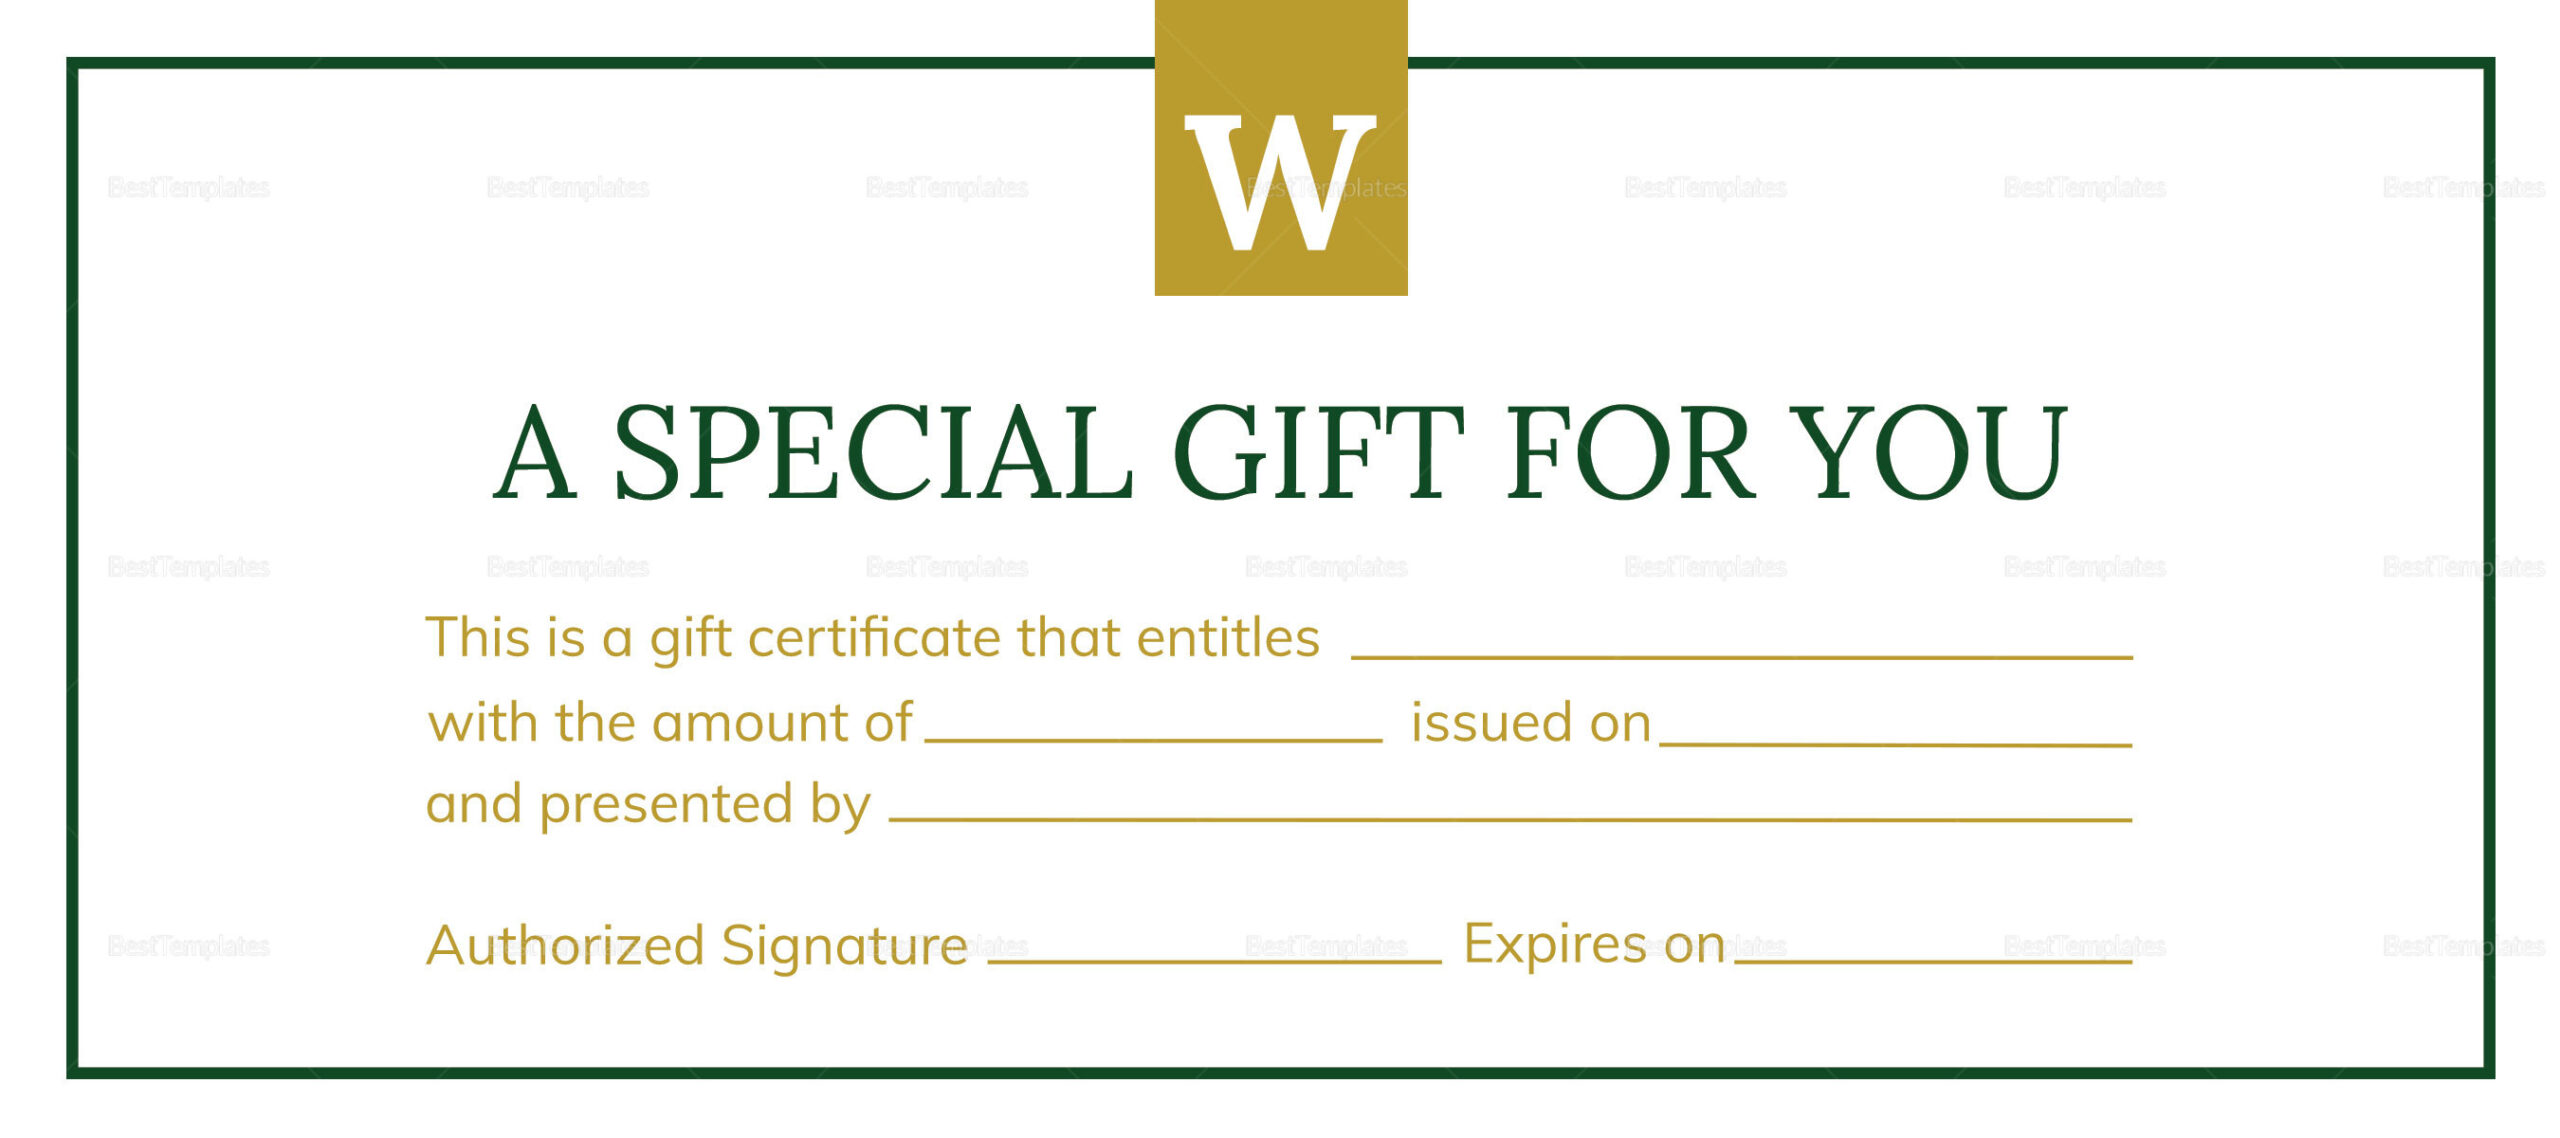 Gift Certificate Templates Indesign Illustrator Gift Coupon With Regard To Gift Certificate Template Indesign